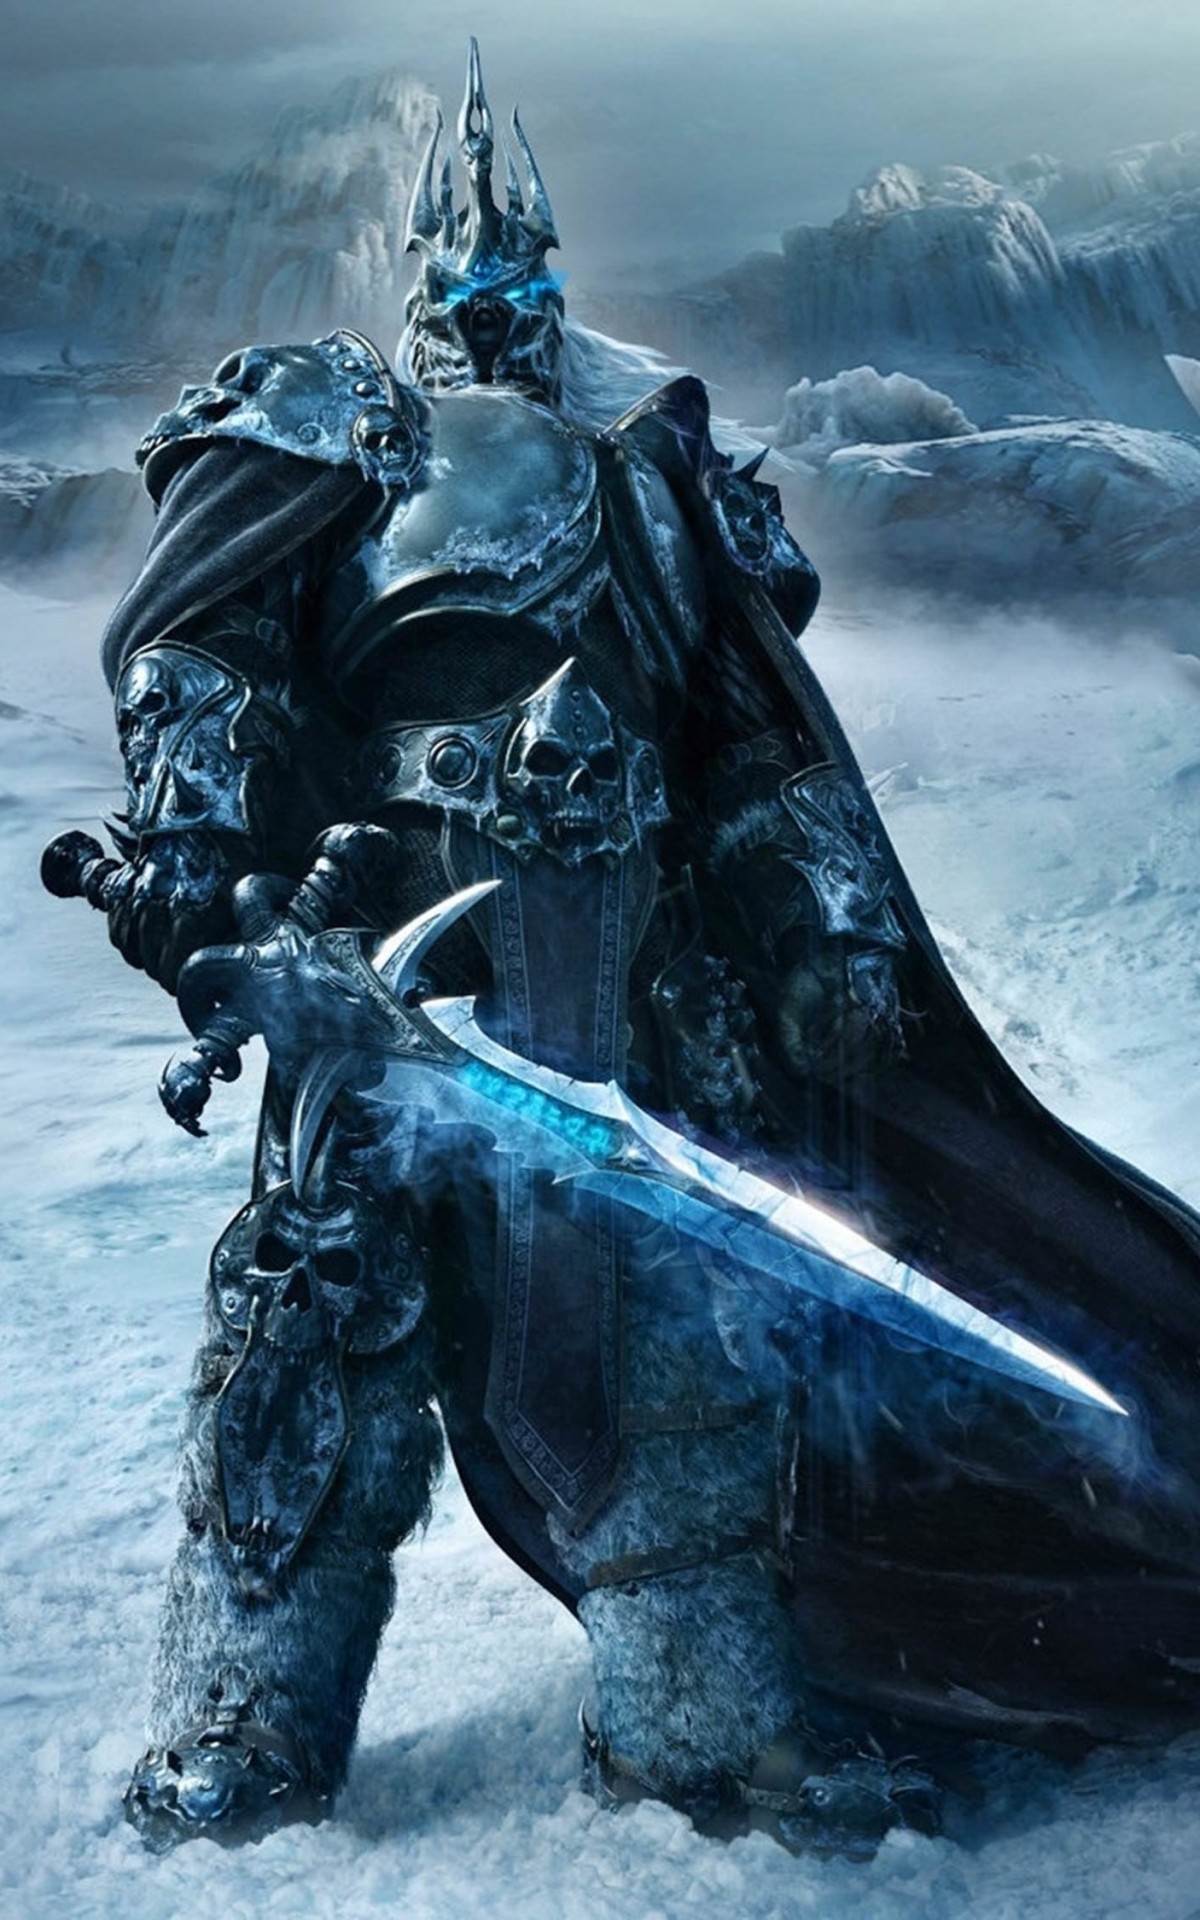 World of Warcraft: Wrath of the Lich King Wallpaper for Amazon Kindle Fire HDX